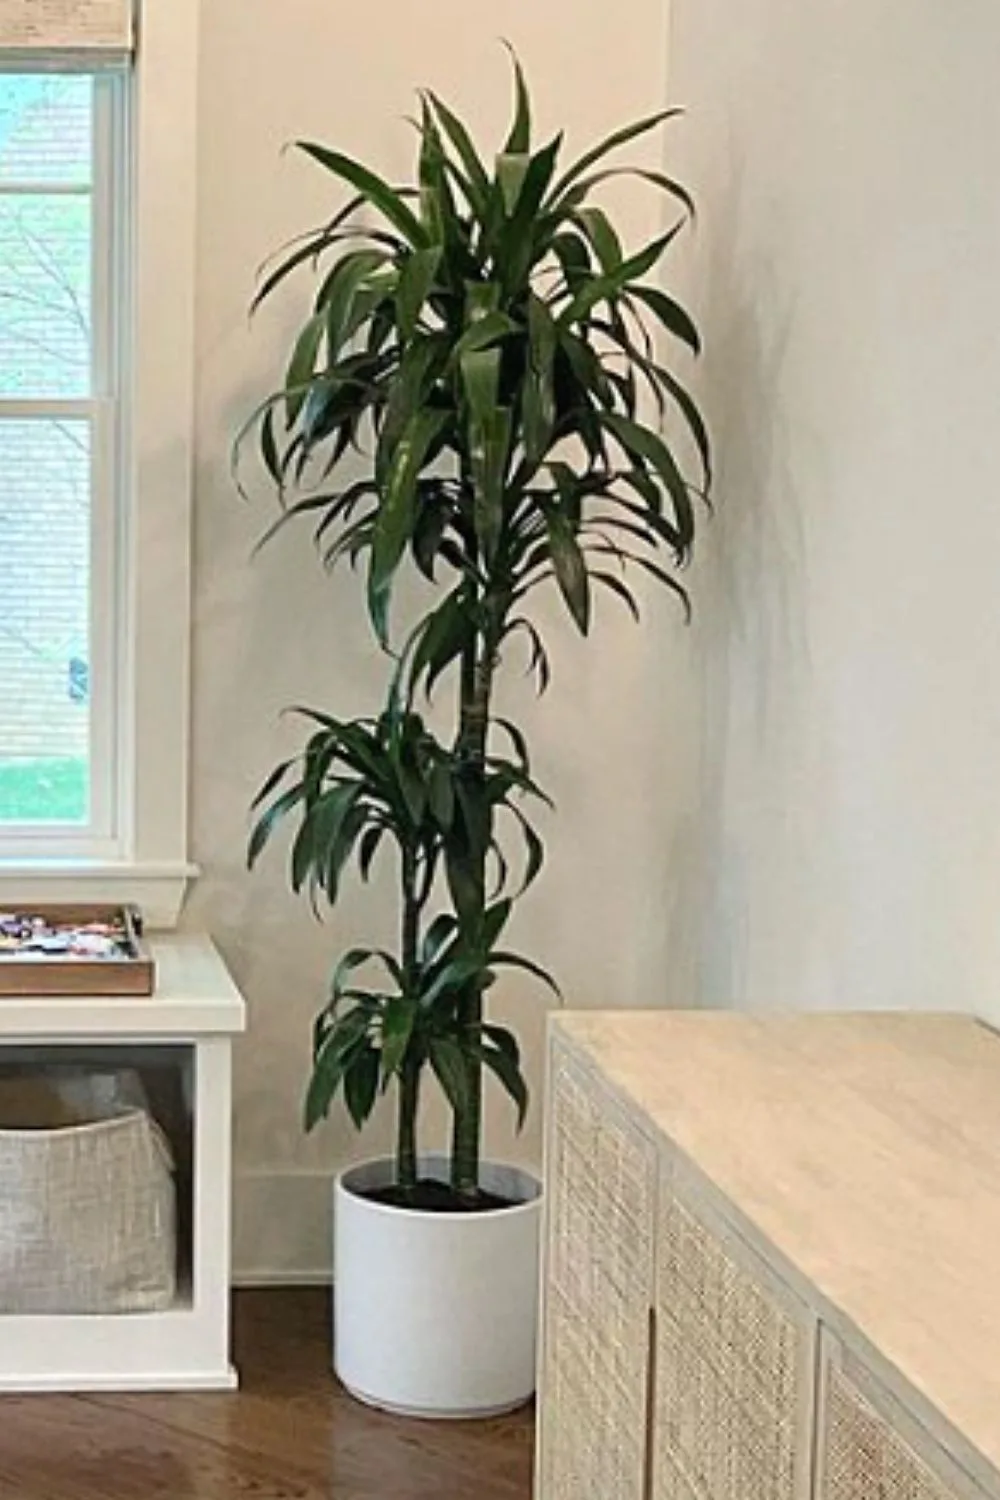 Dracaena Lisa Cane is another great addition to your growing northeast-facing window plant collection